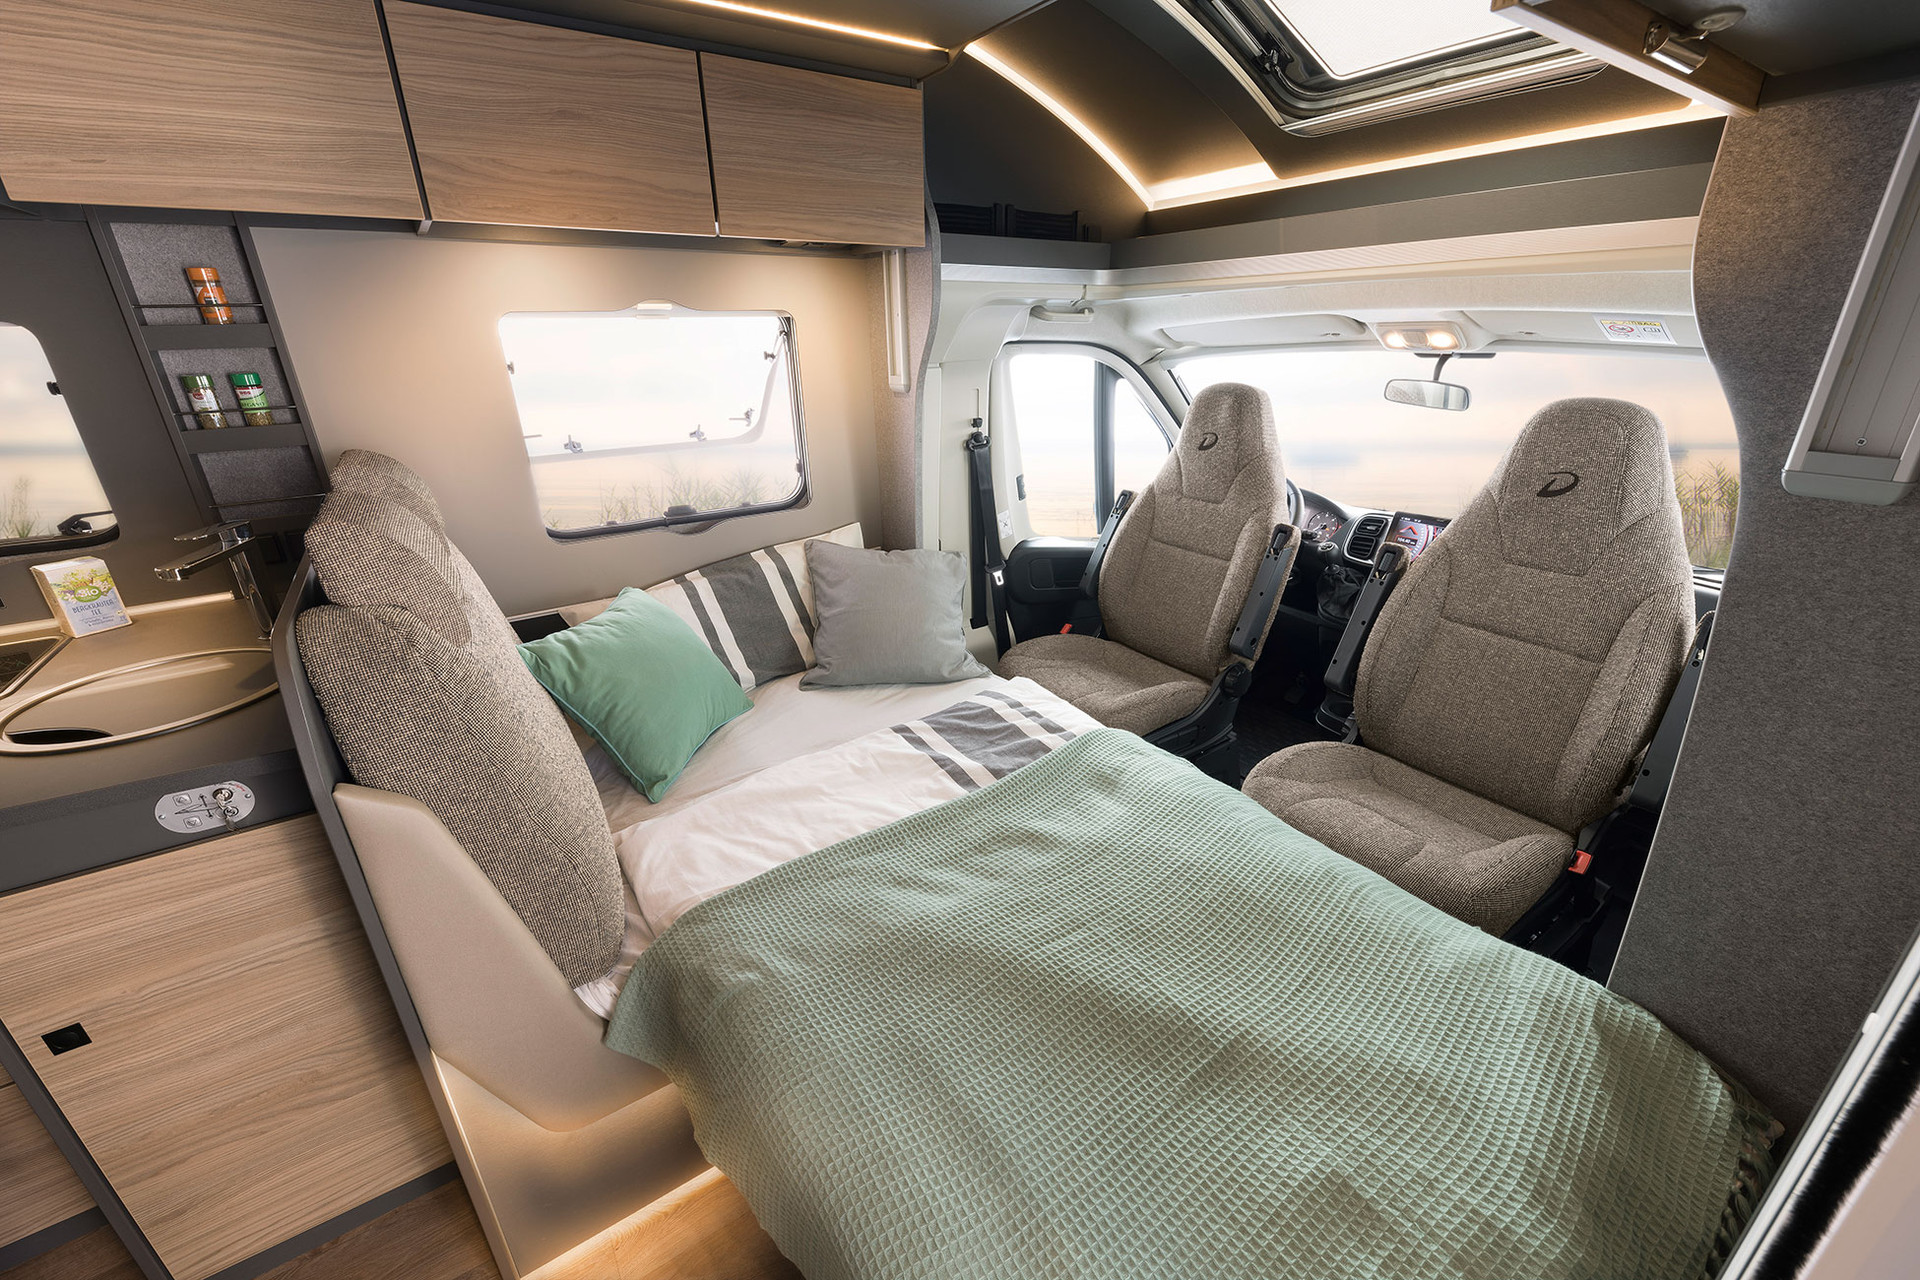 In some Low Profile layouts, the seating lounge can be converted into an additional bed if required (depending on the model).